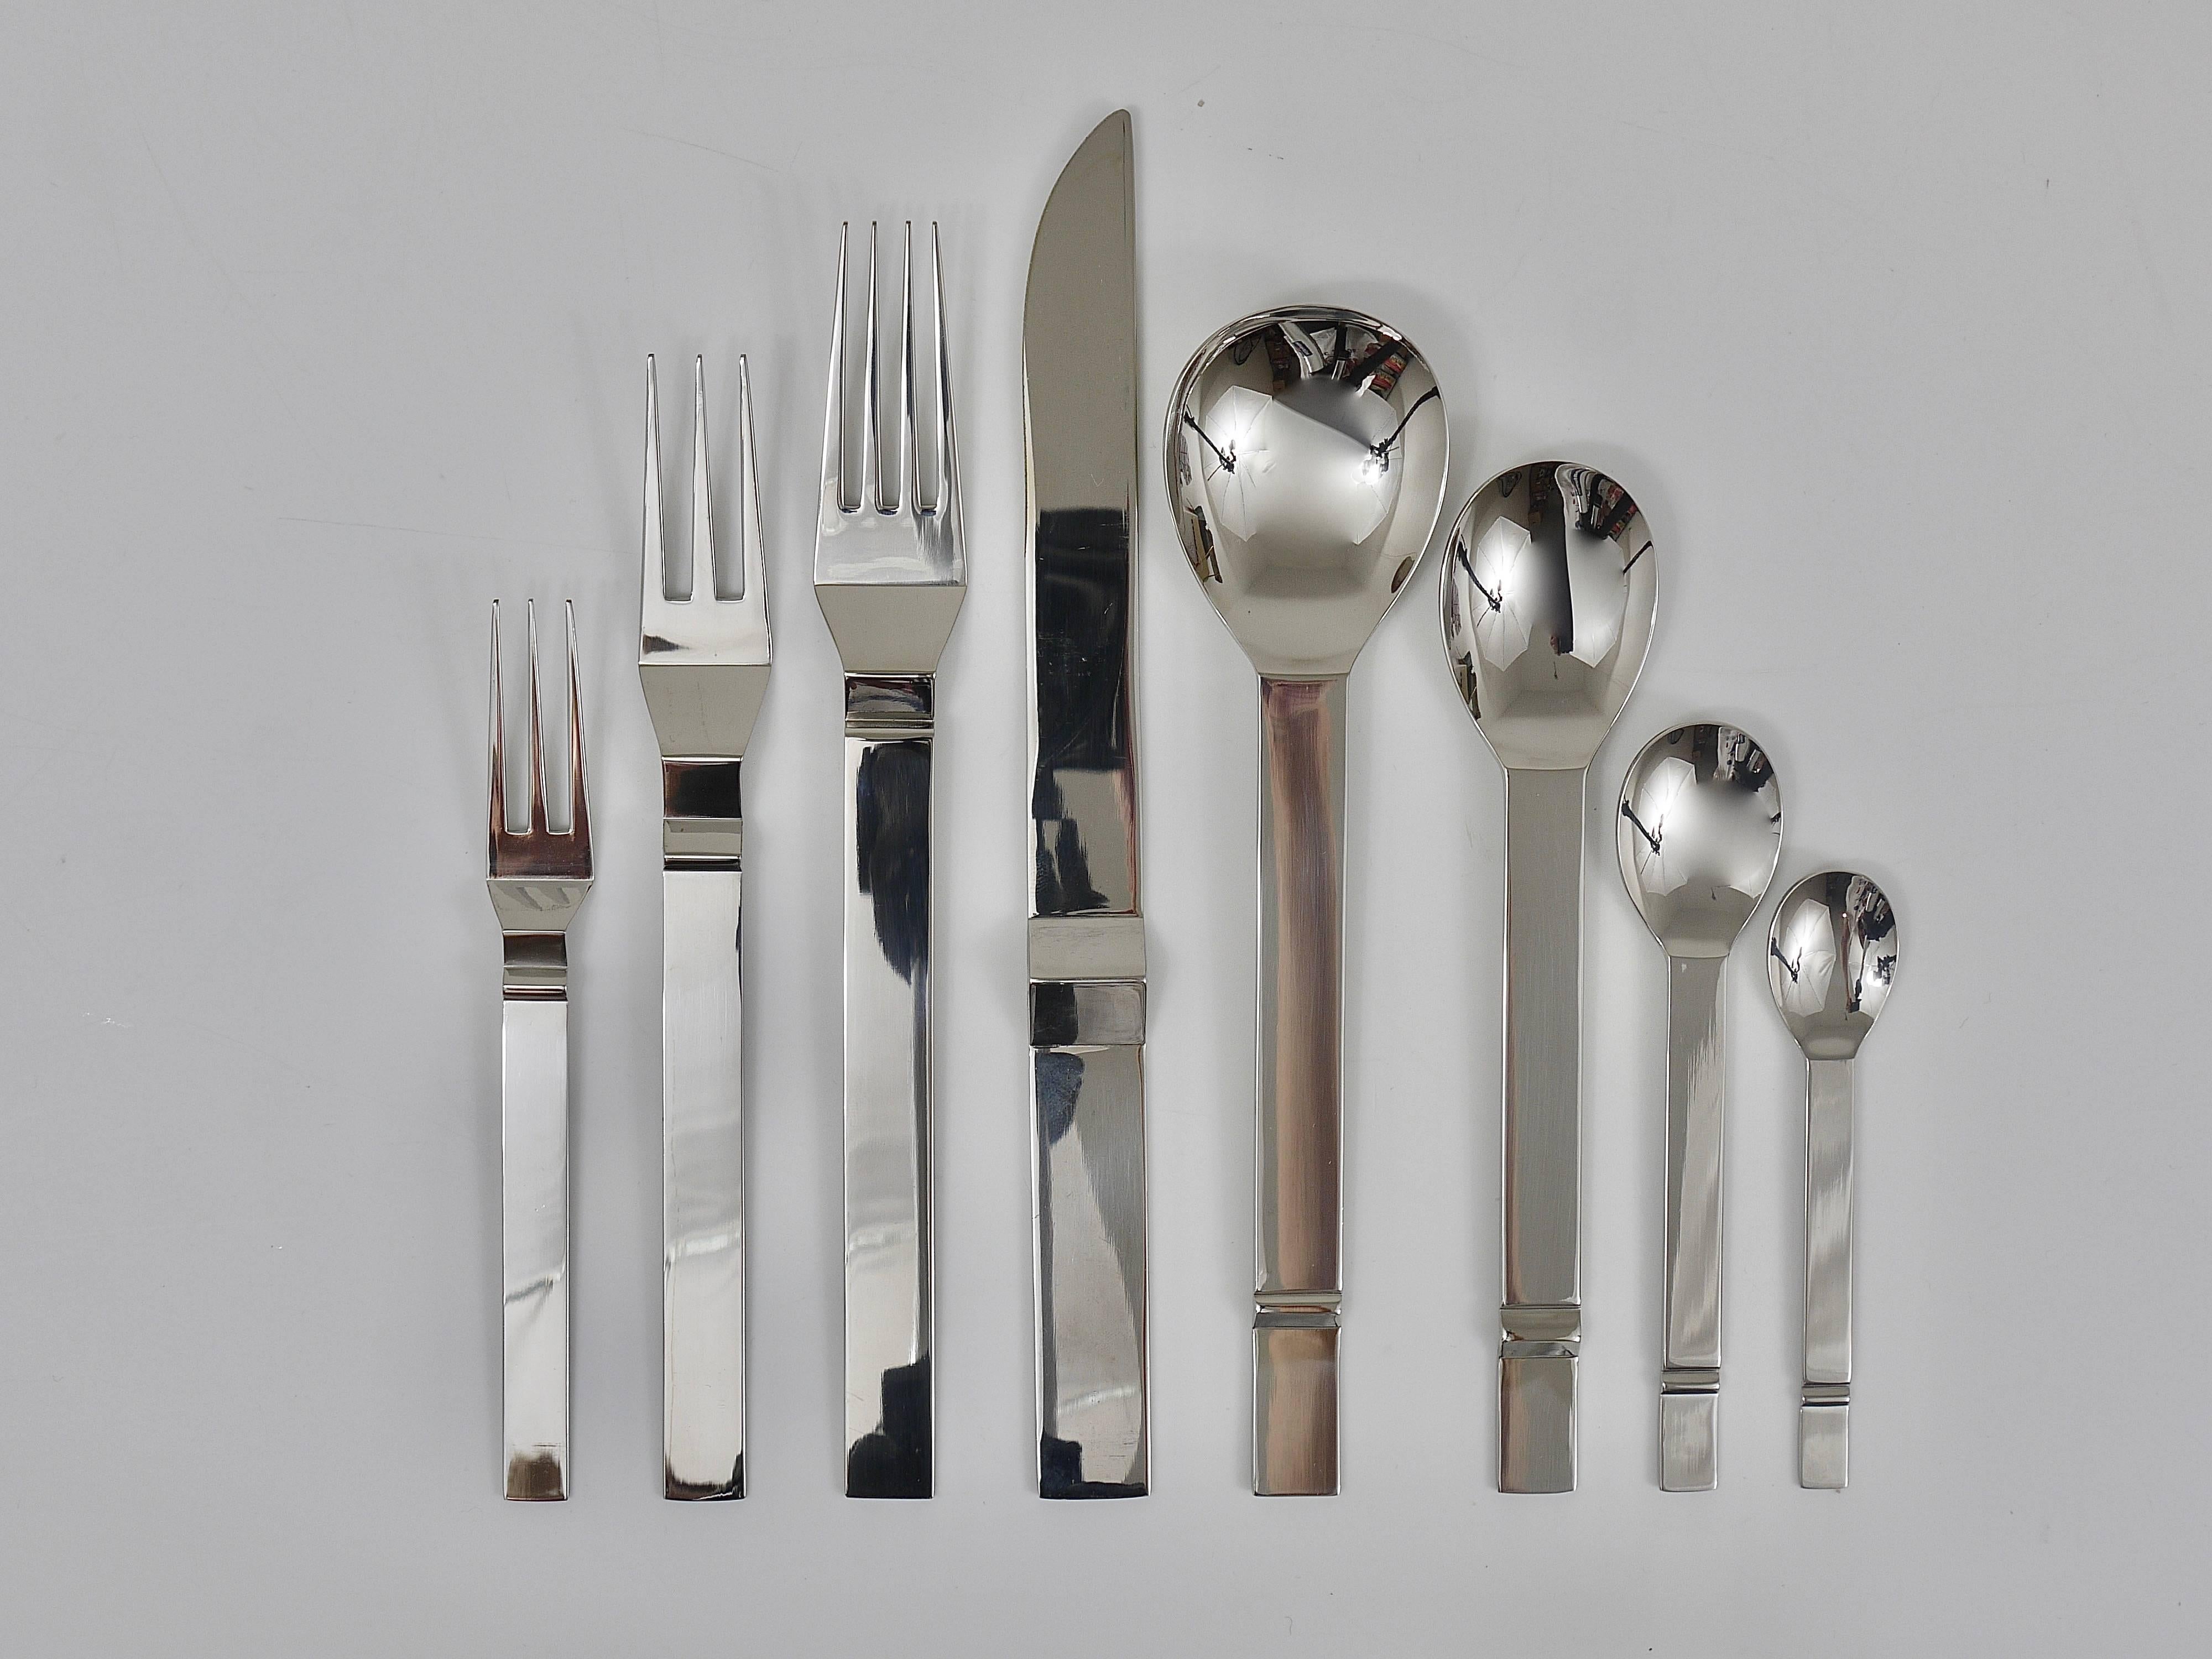 A comprehensive set of flatware, designed in the 1990s by Bob Patino (1942 - 1998) for Berndorf Austria. Beautiful and hard-to-find cutlery made of chrome-plated stainless steel discontinued. We offer two identical sets for six persons each. Each